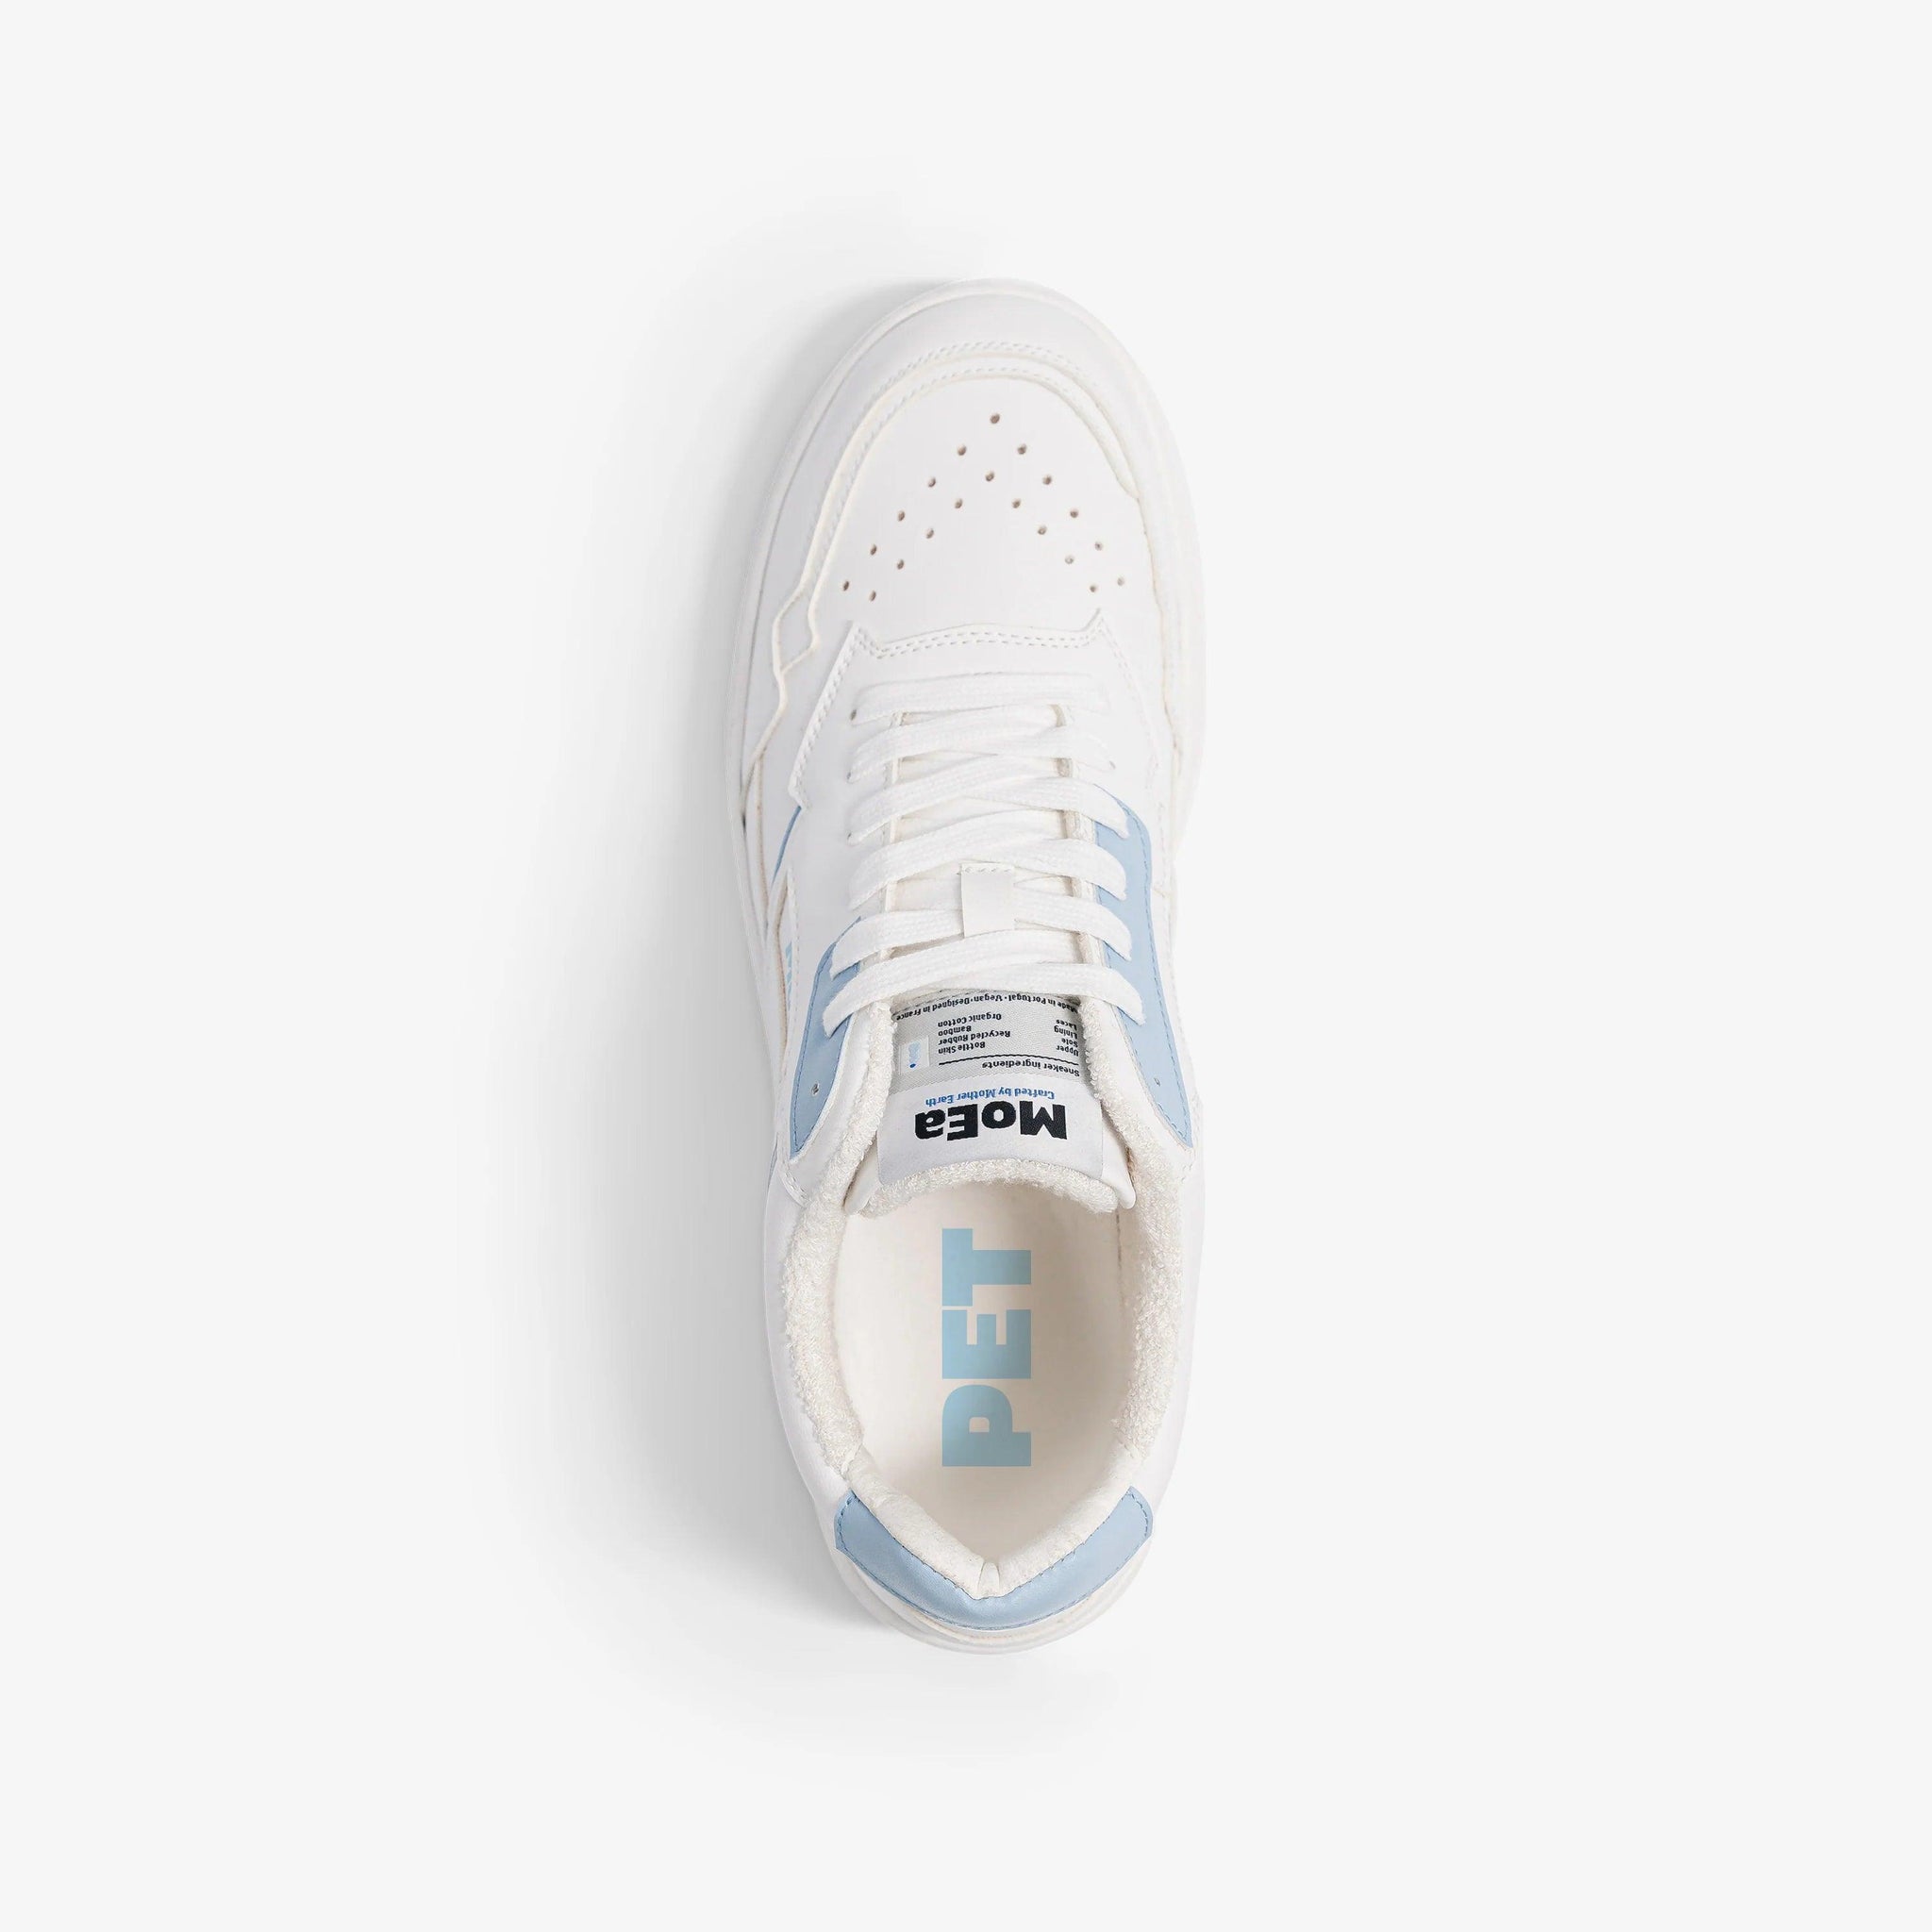 MoEa Gen1 Pet bottle Sky Blue and White trainer - MADE THE EDIT